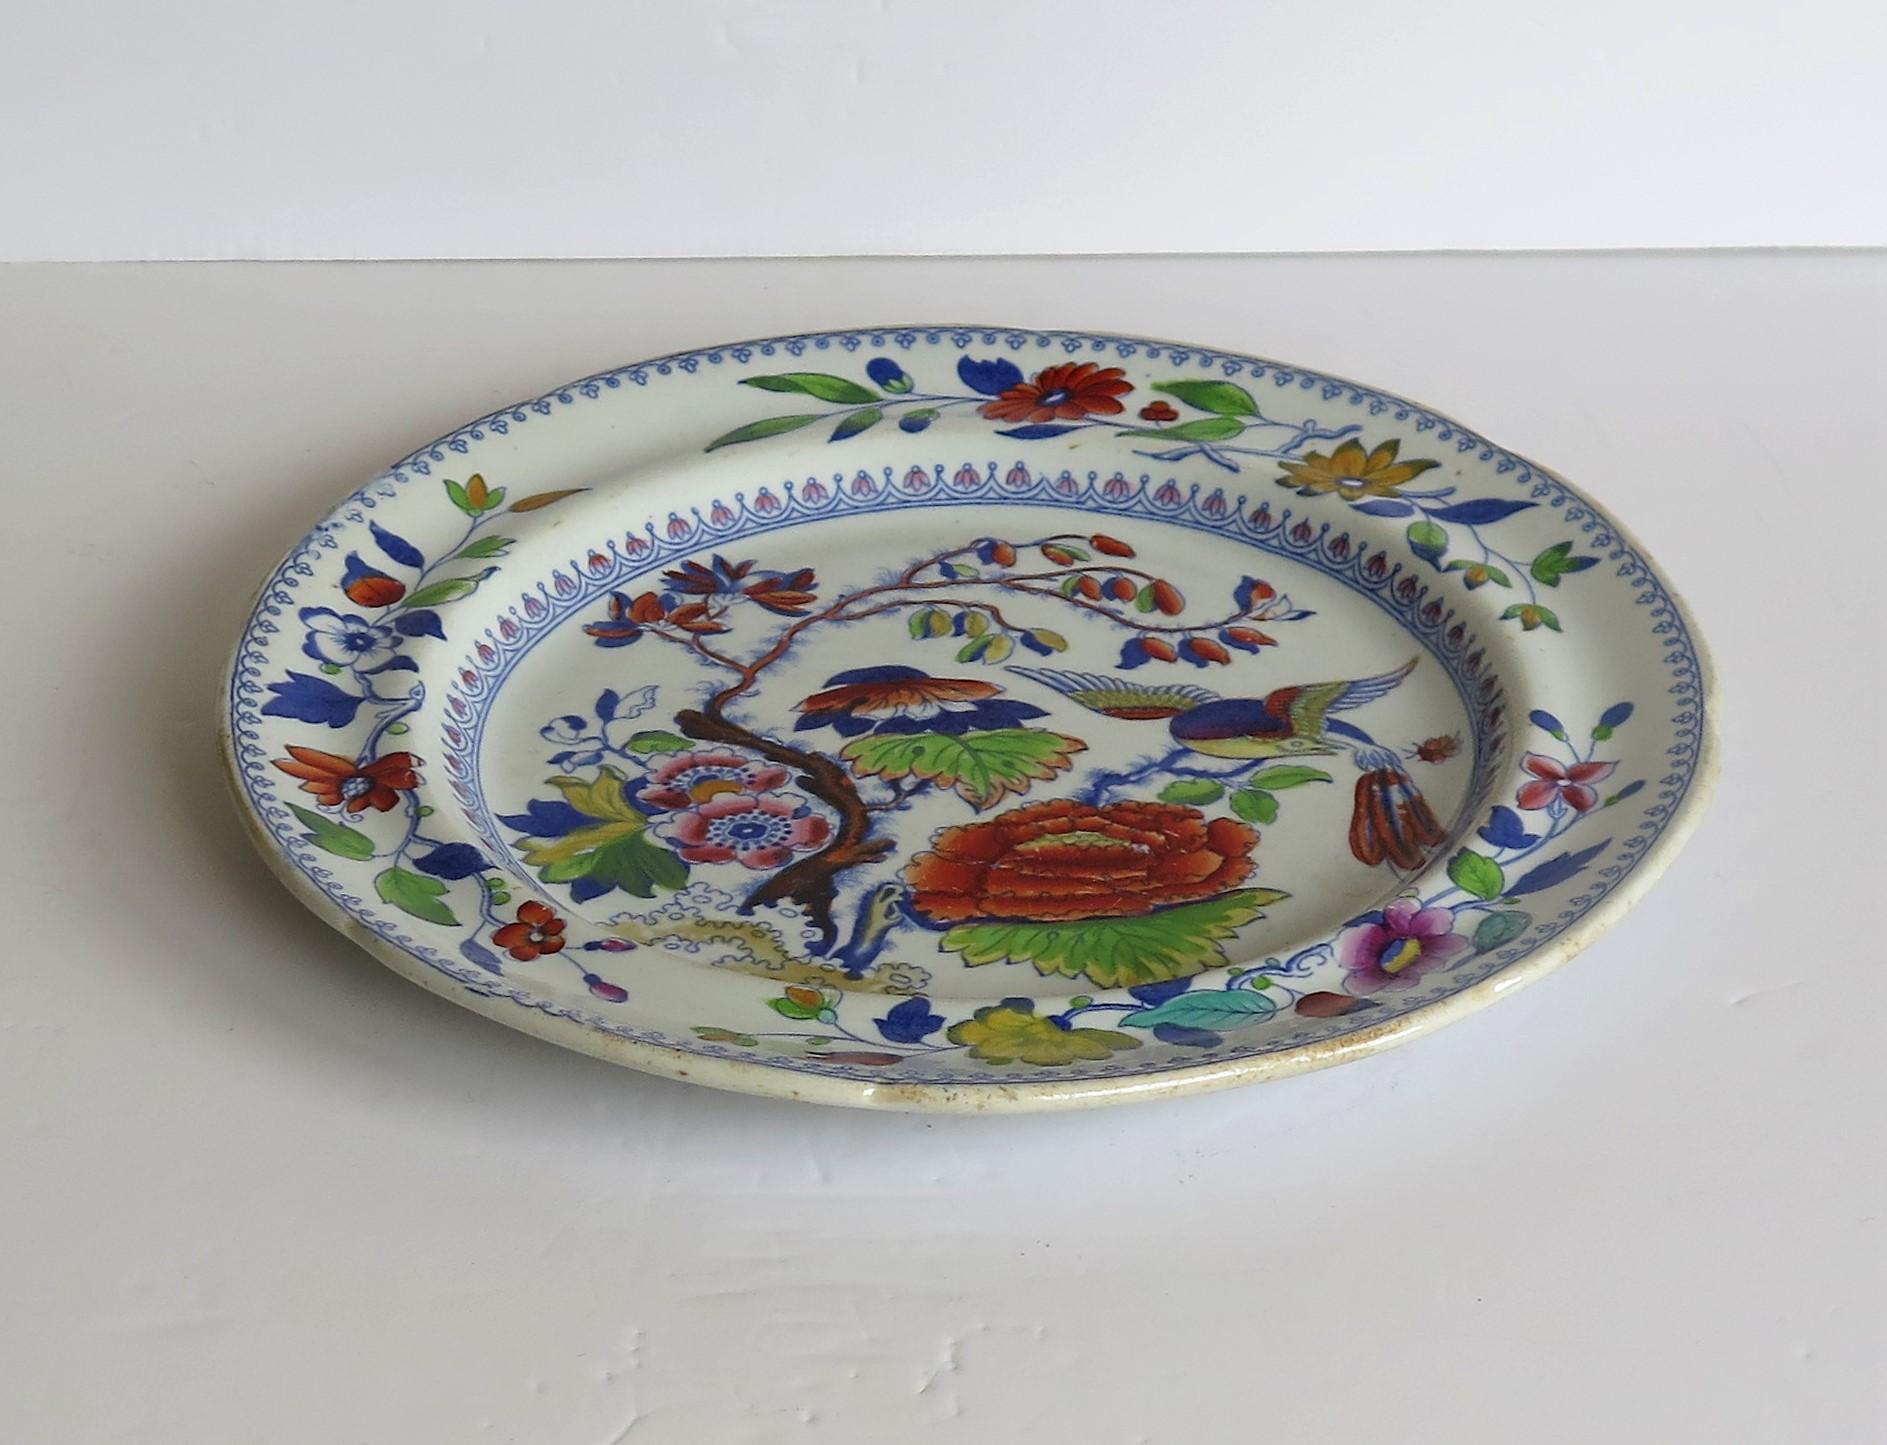 This is a late Georgian Ironstone dinner plate in the distinctive flying bird pattern, made by Mason's of Lane Delph, Staffordshire, England, during the early 19th century, circa 1825.

This is a large well potted dinner plate with a notched